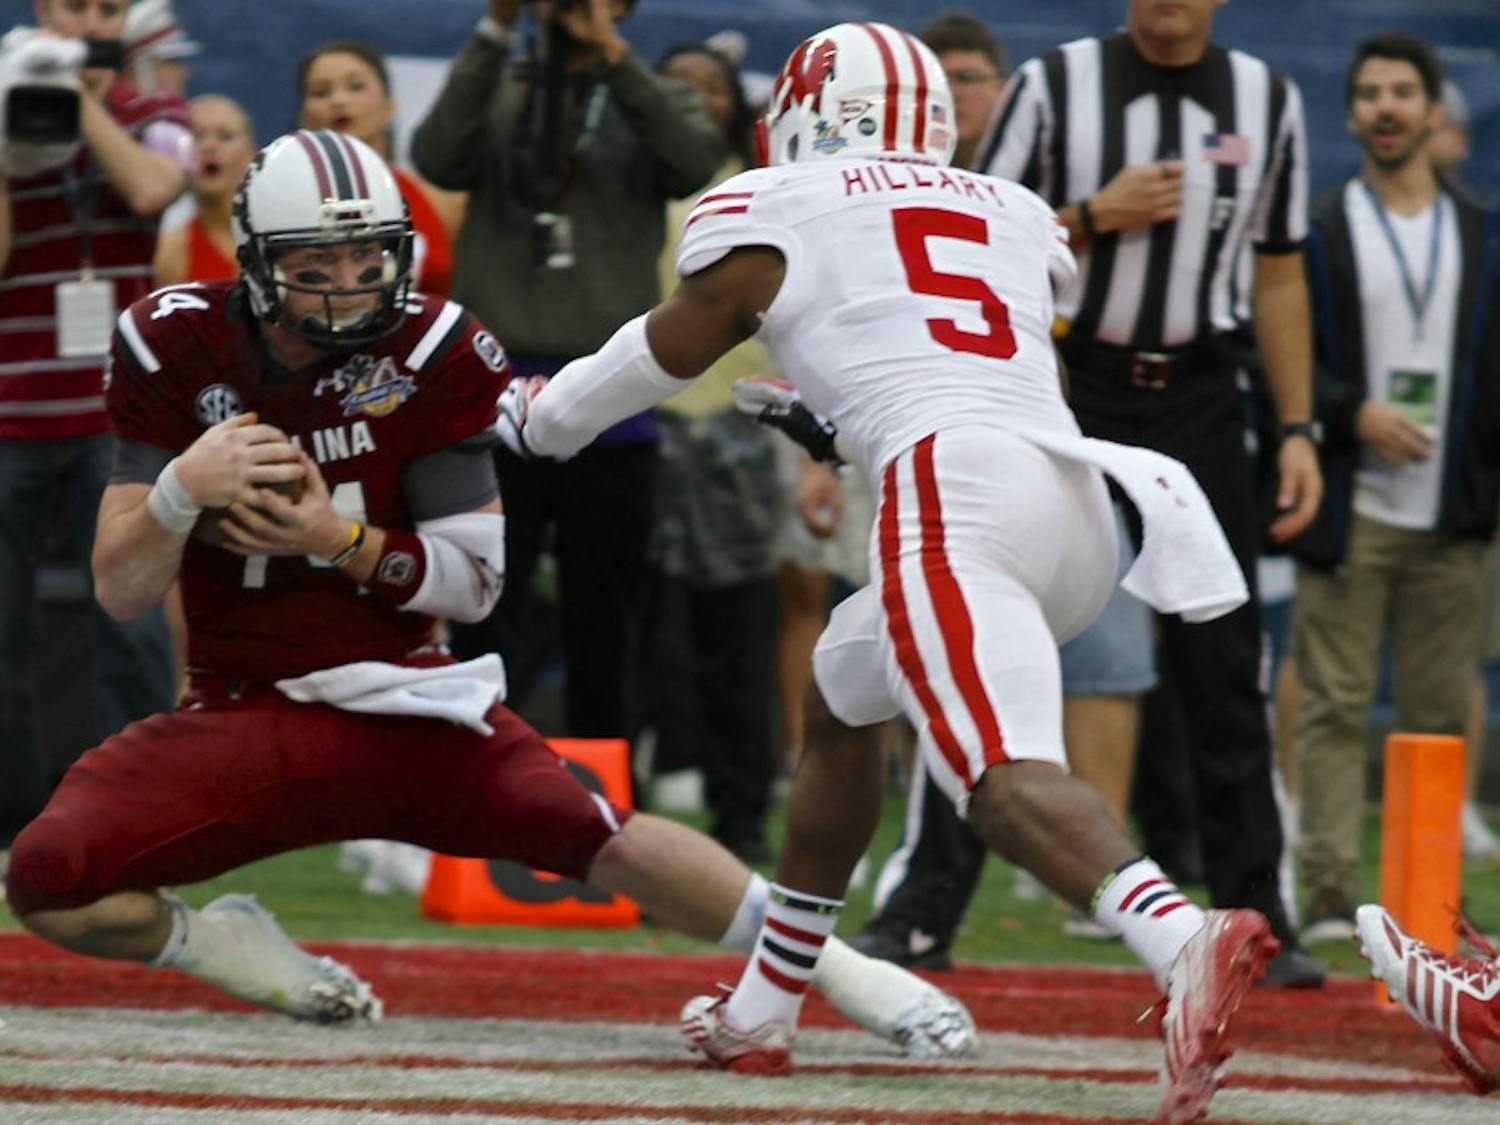 	Senior quarterback Connor Shaw brings down a pass from junior wide receiver Bruce Ellington in the 2014 Capital One Bowl.